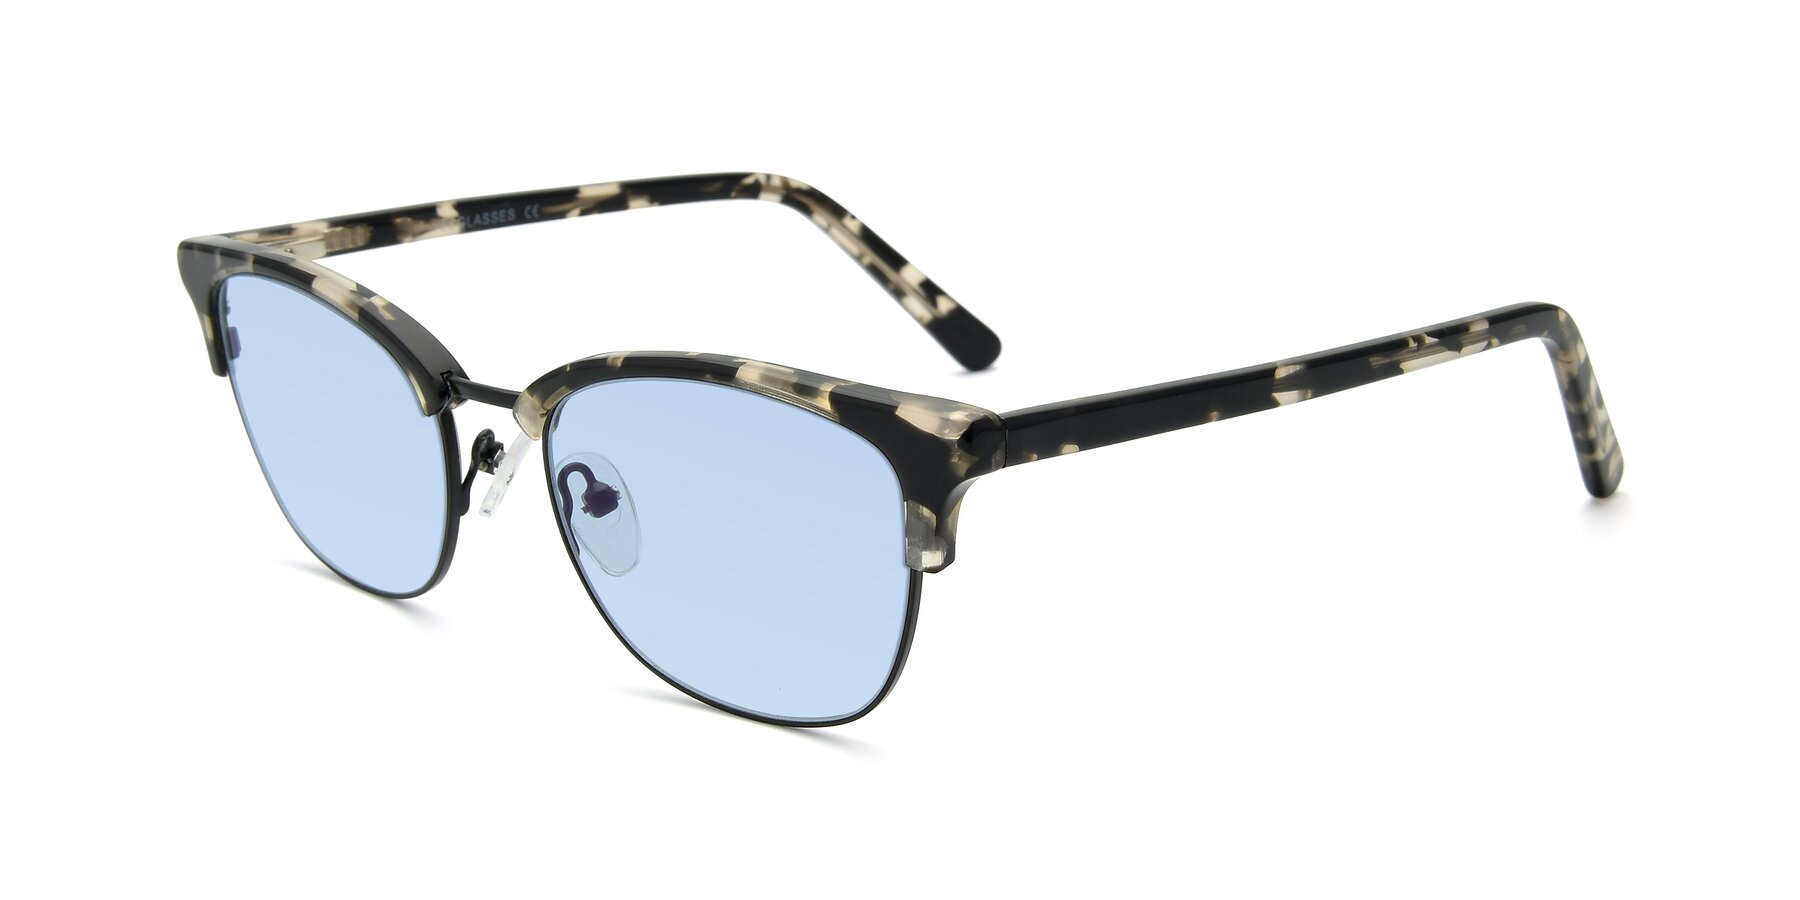 Angle of 17463 in Black-Tortoise with Light Blue Tinted Lenses